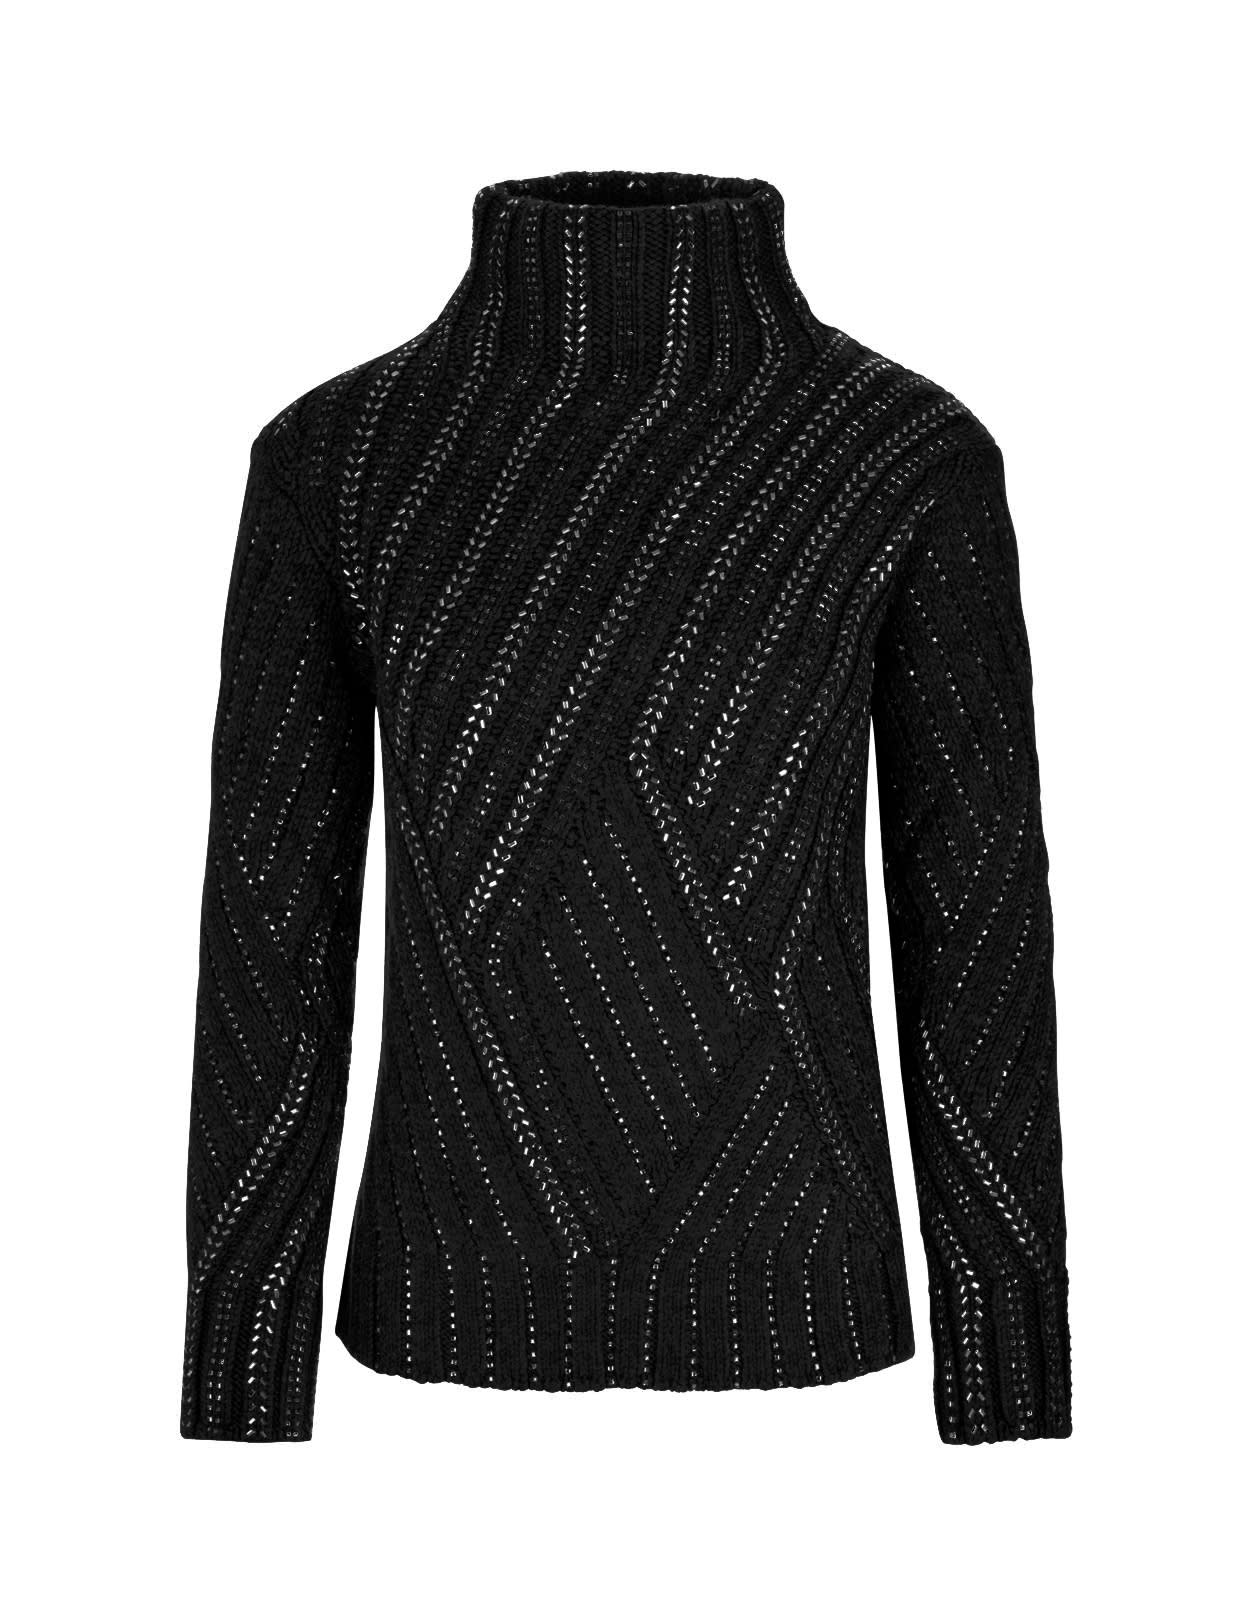 Ermanno Scervino Woman Turtleneck In Black Wool Blend With Crystals